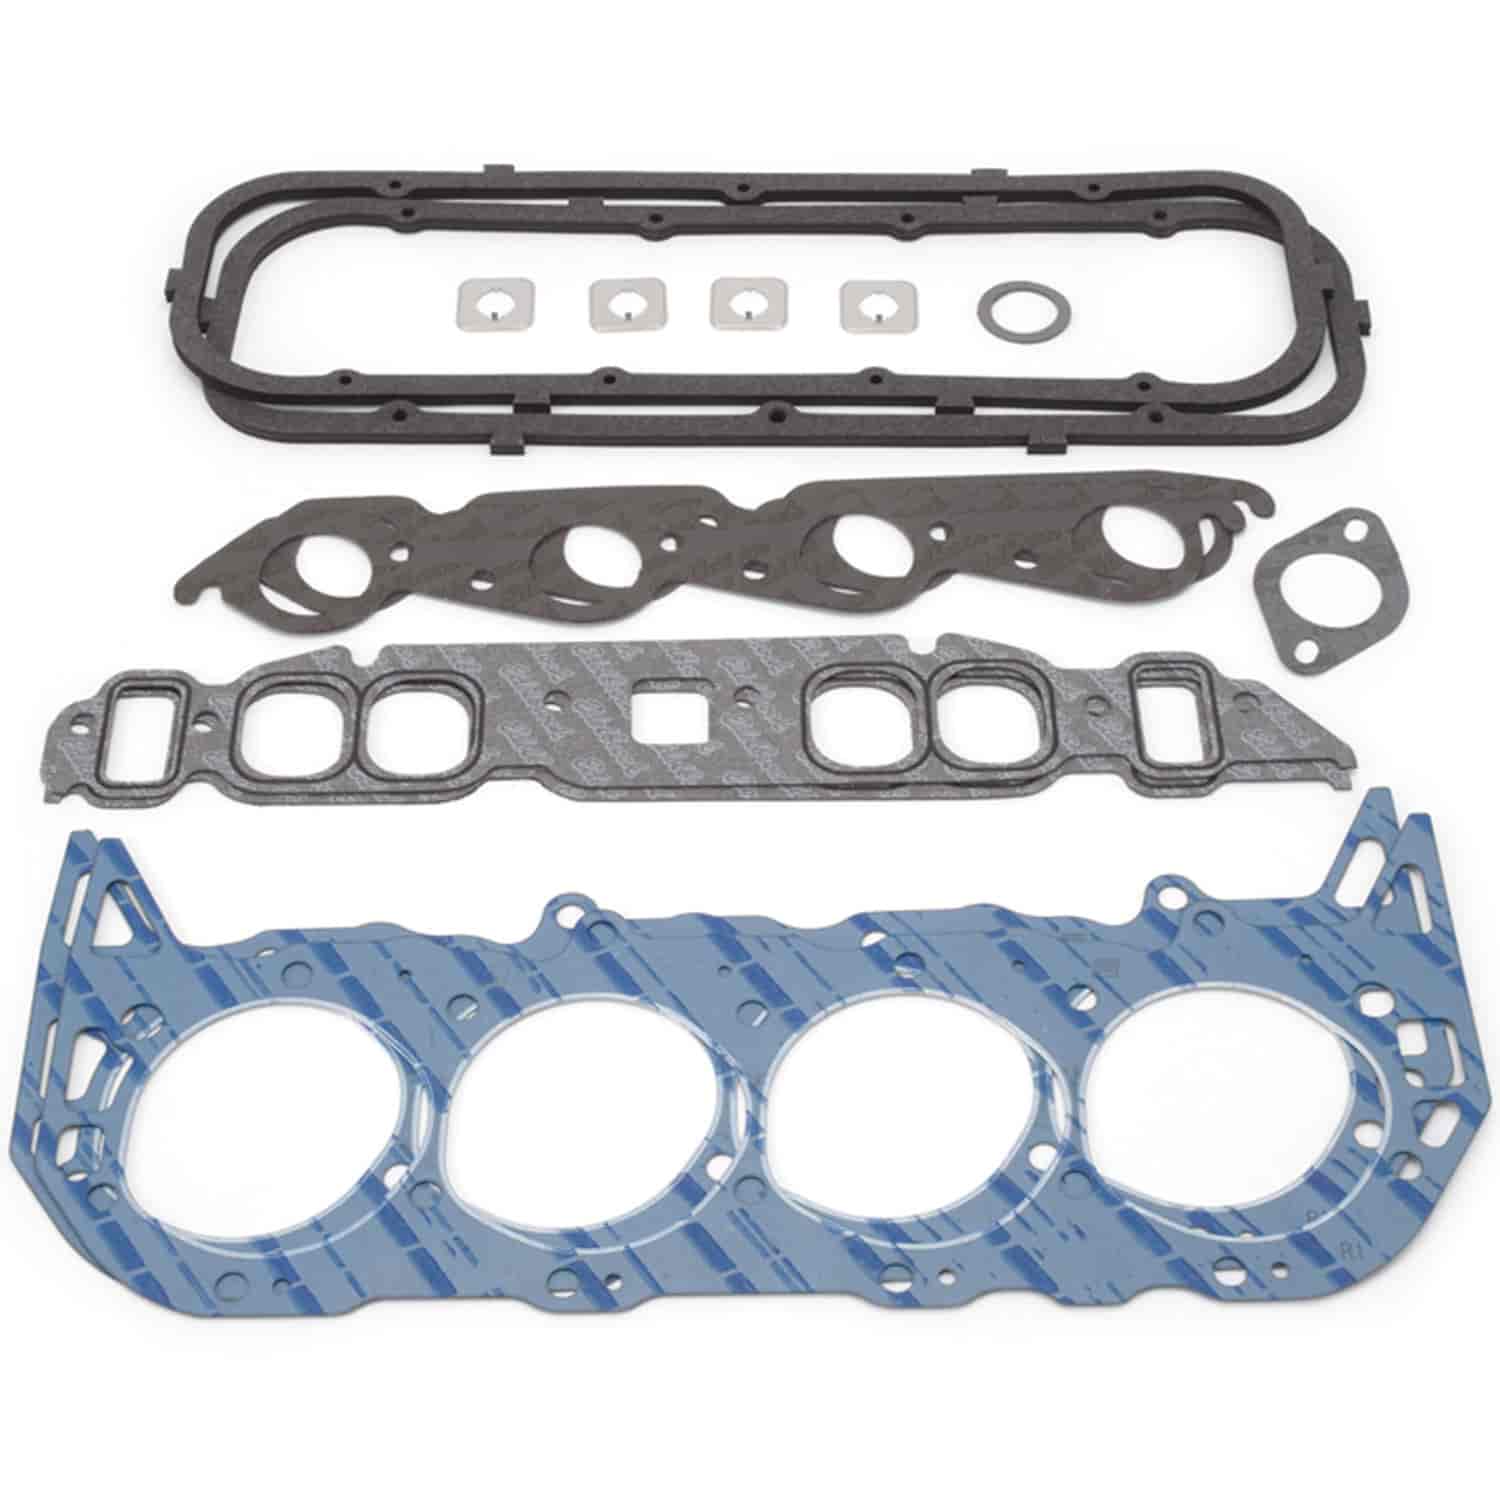 Complete Head Gasket Set for Big Block Chevy Mark IV